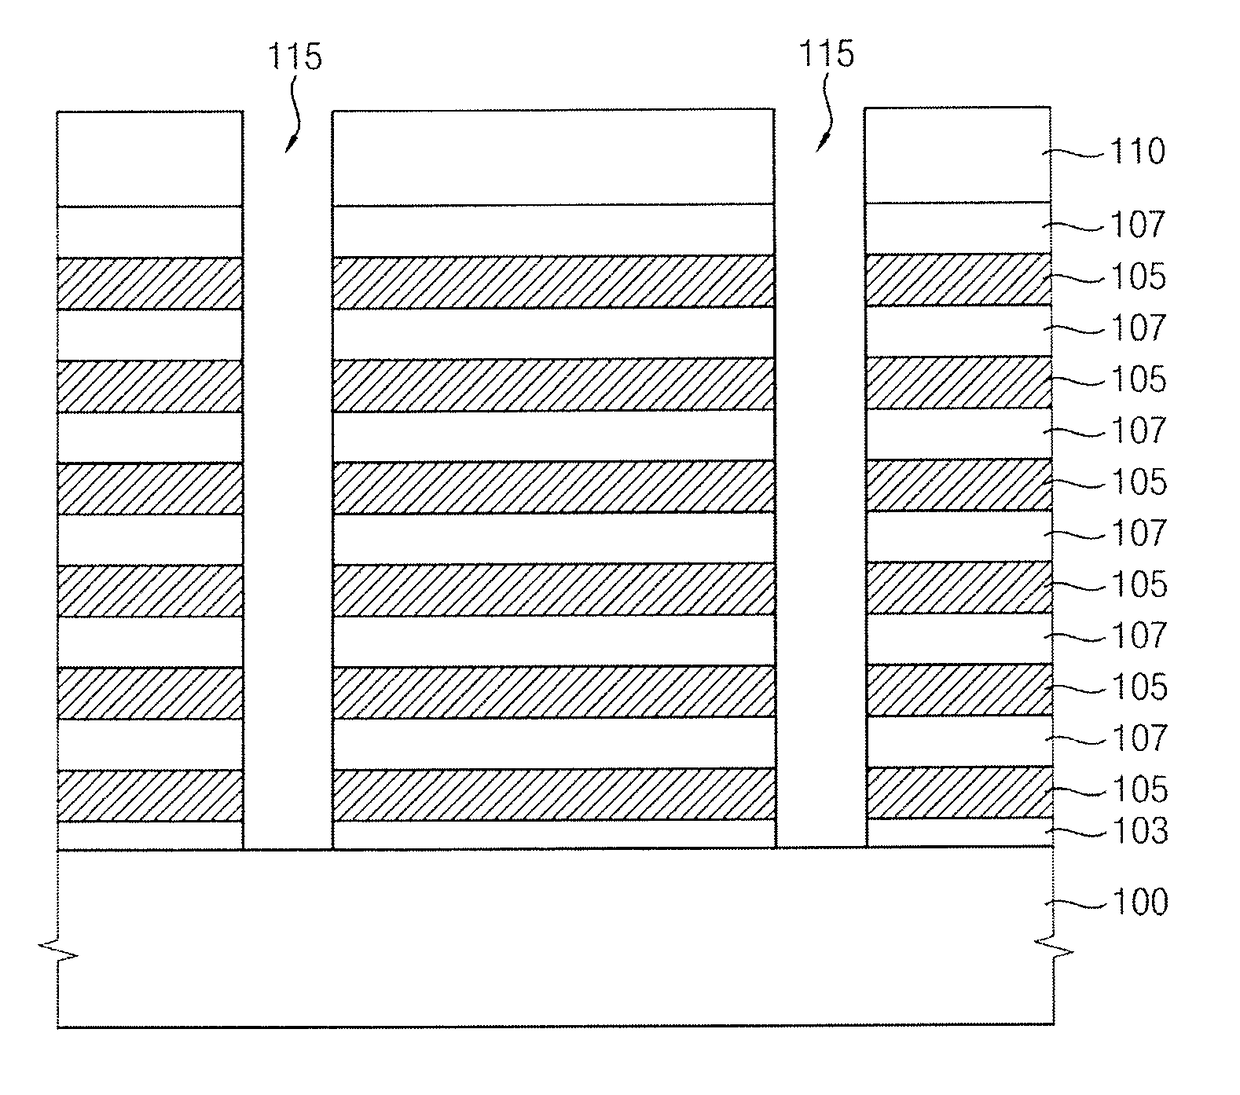 Plasma etching apparatus and method of manufacturing a semiconductor device using the same